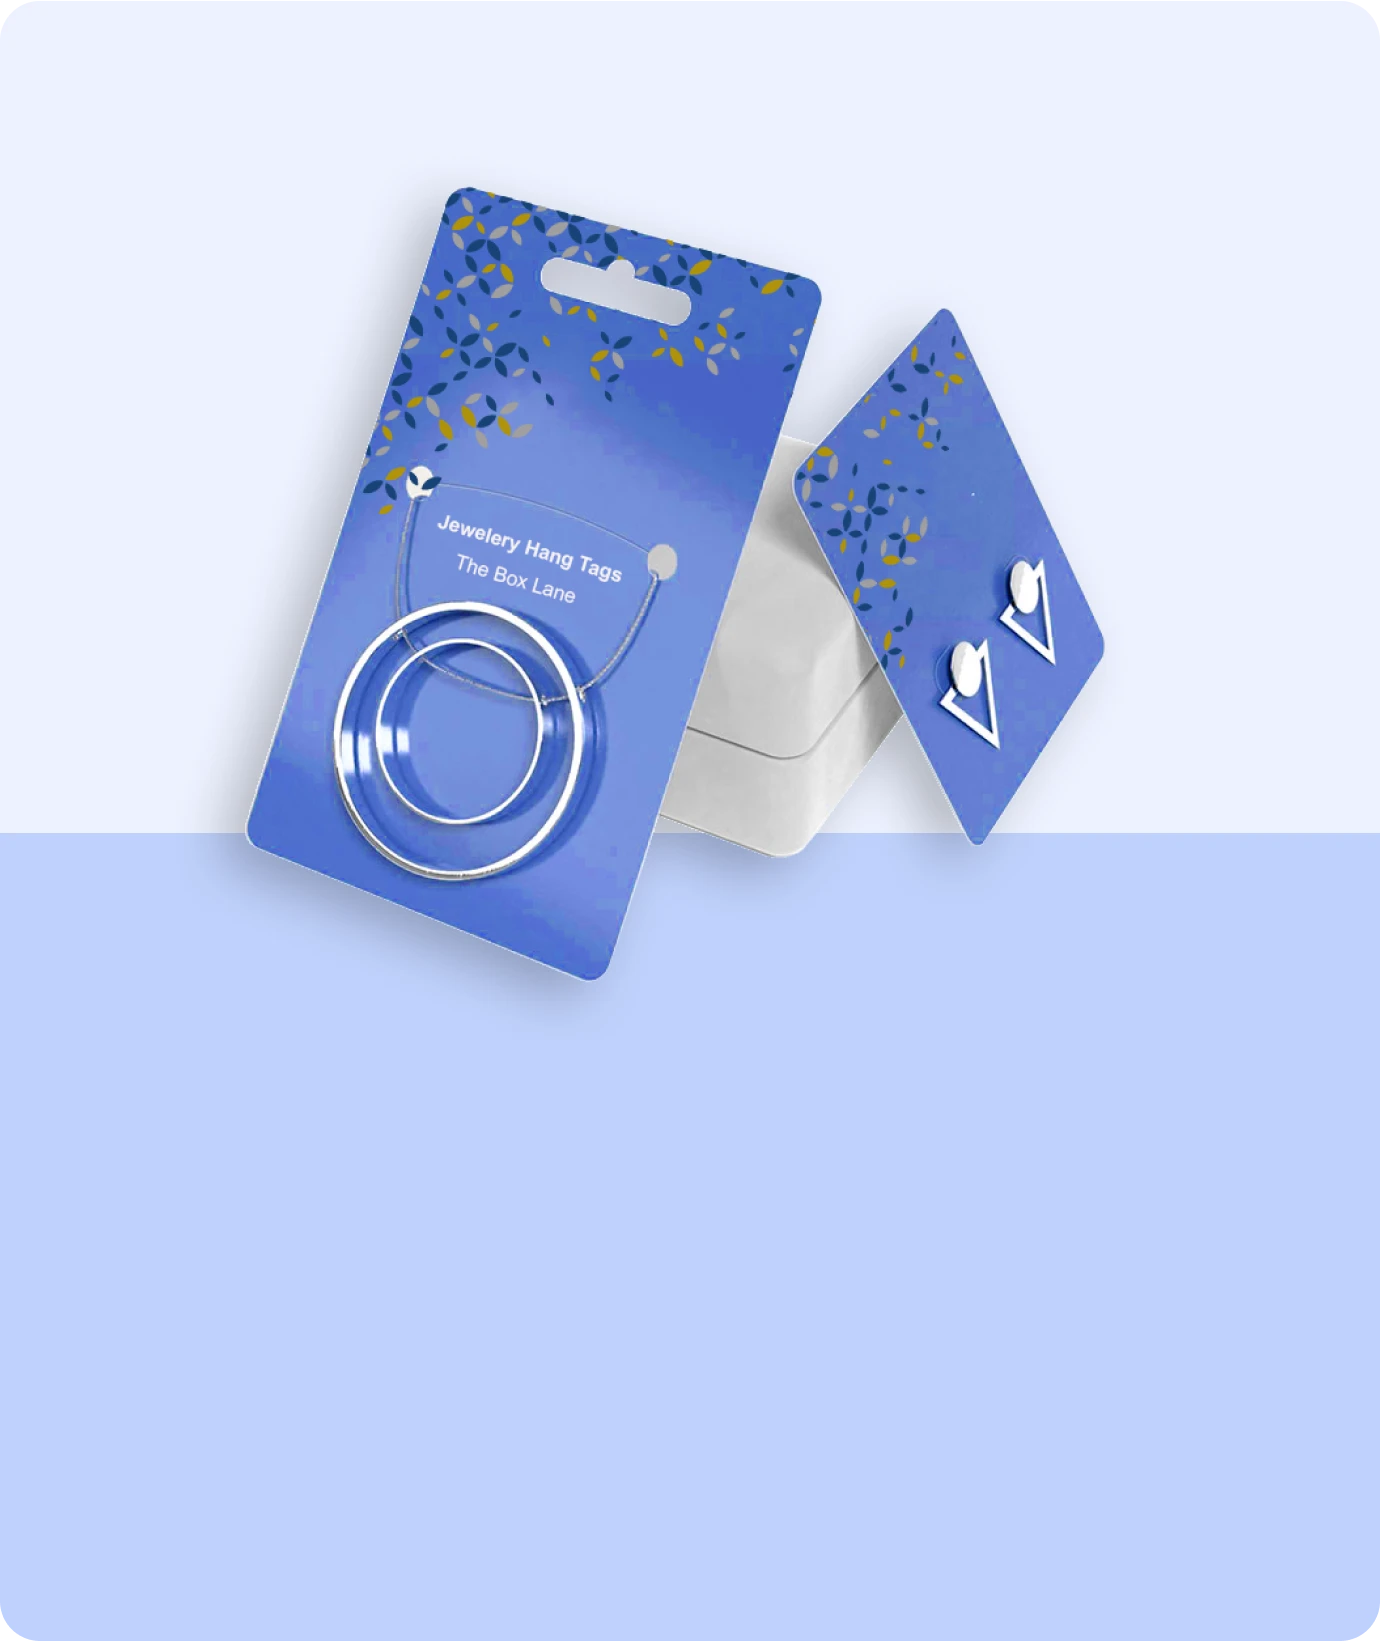 Jewelry Hang Tags related product image | The Box Lane